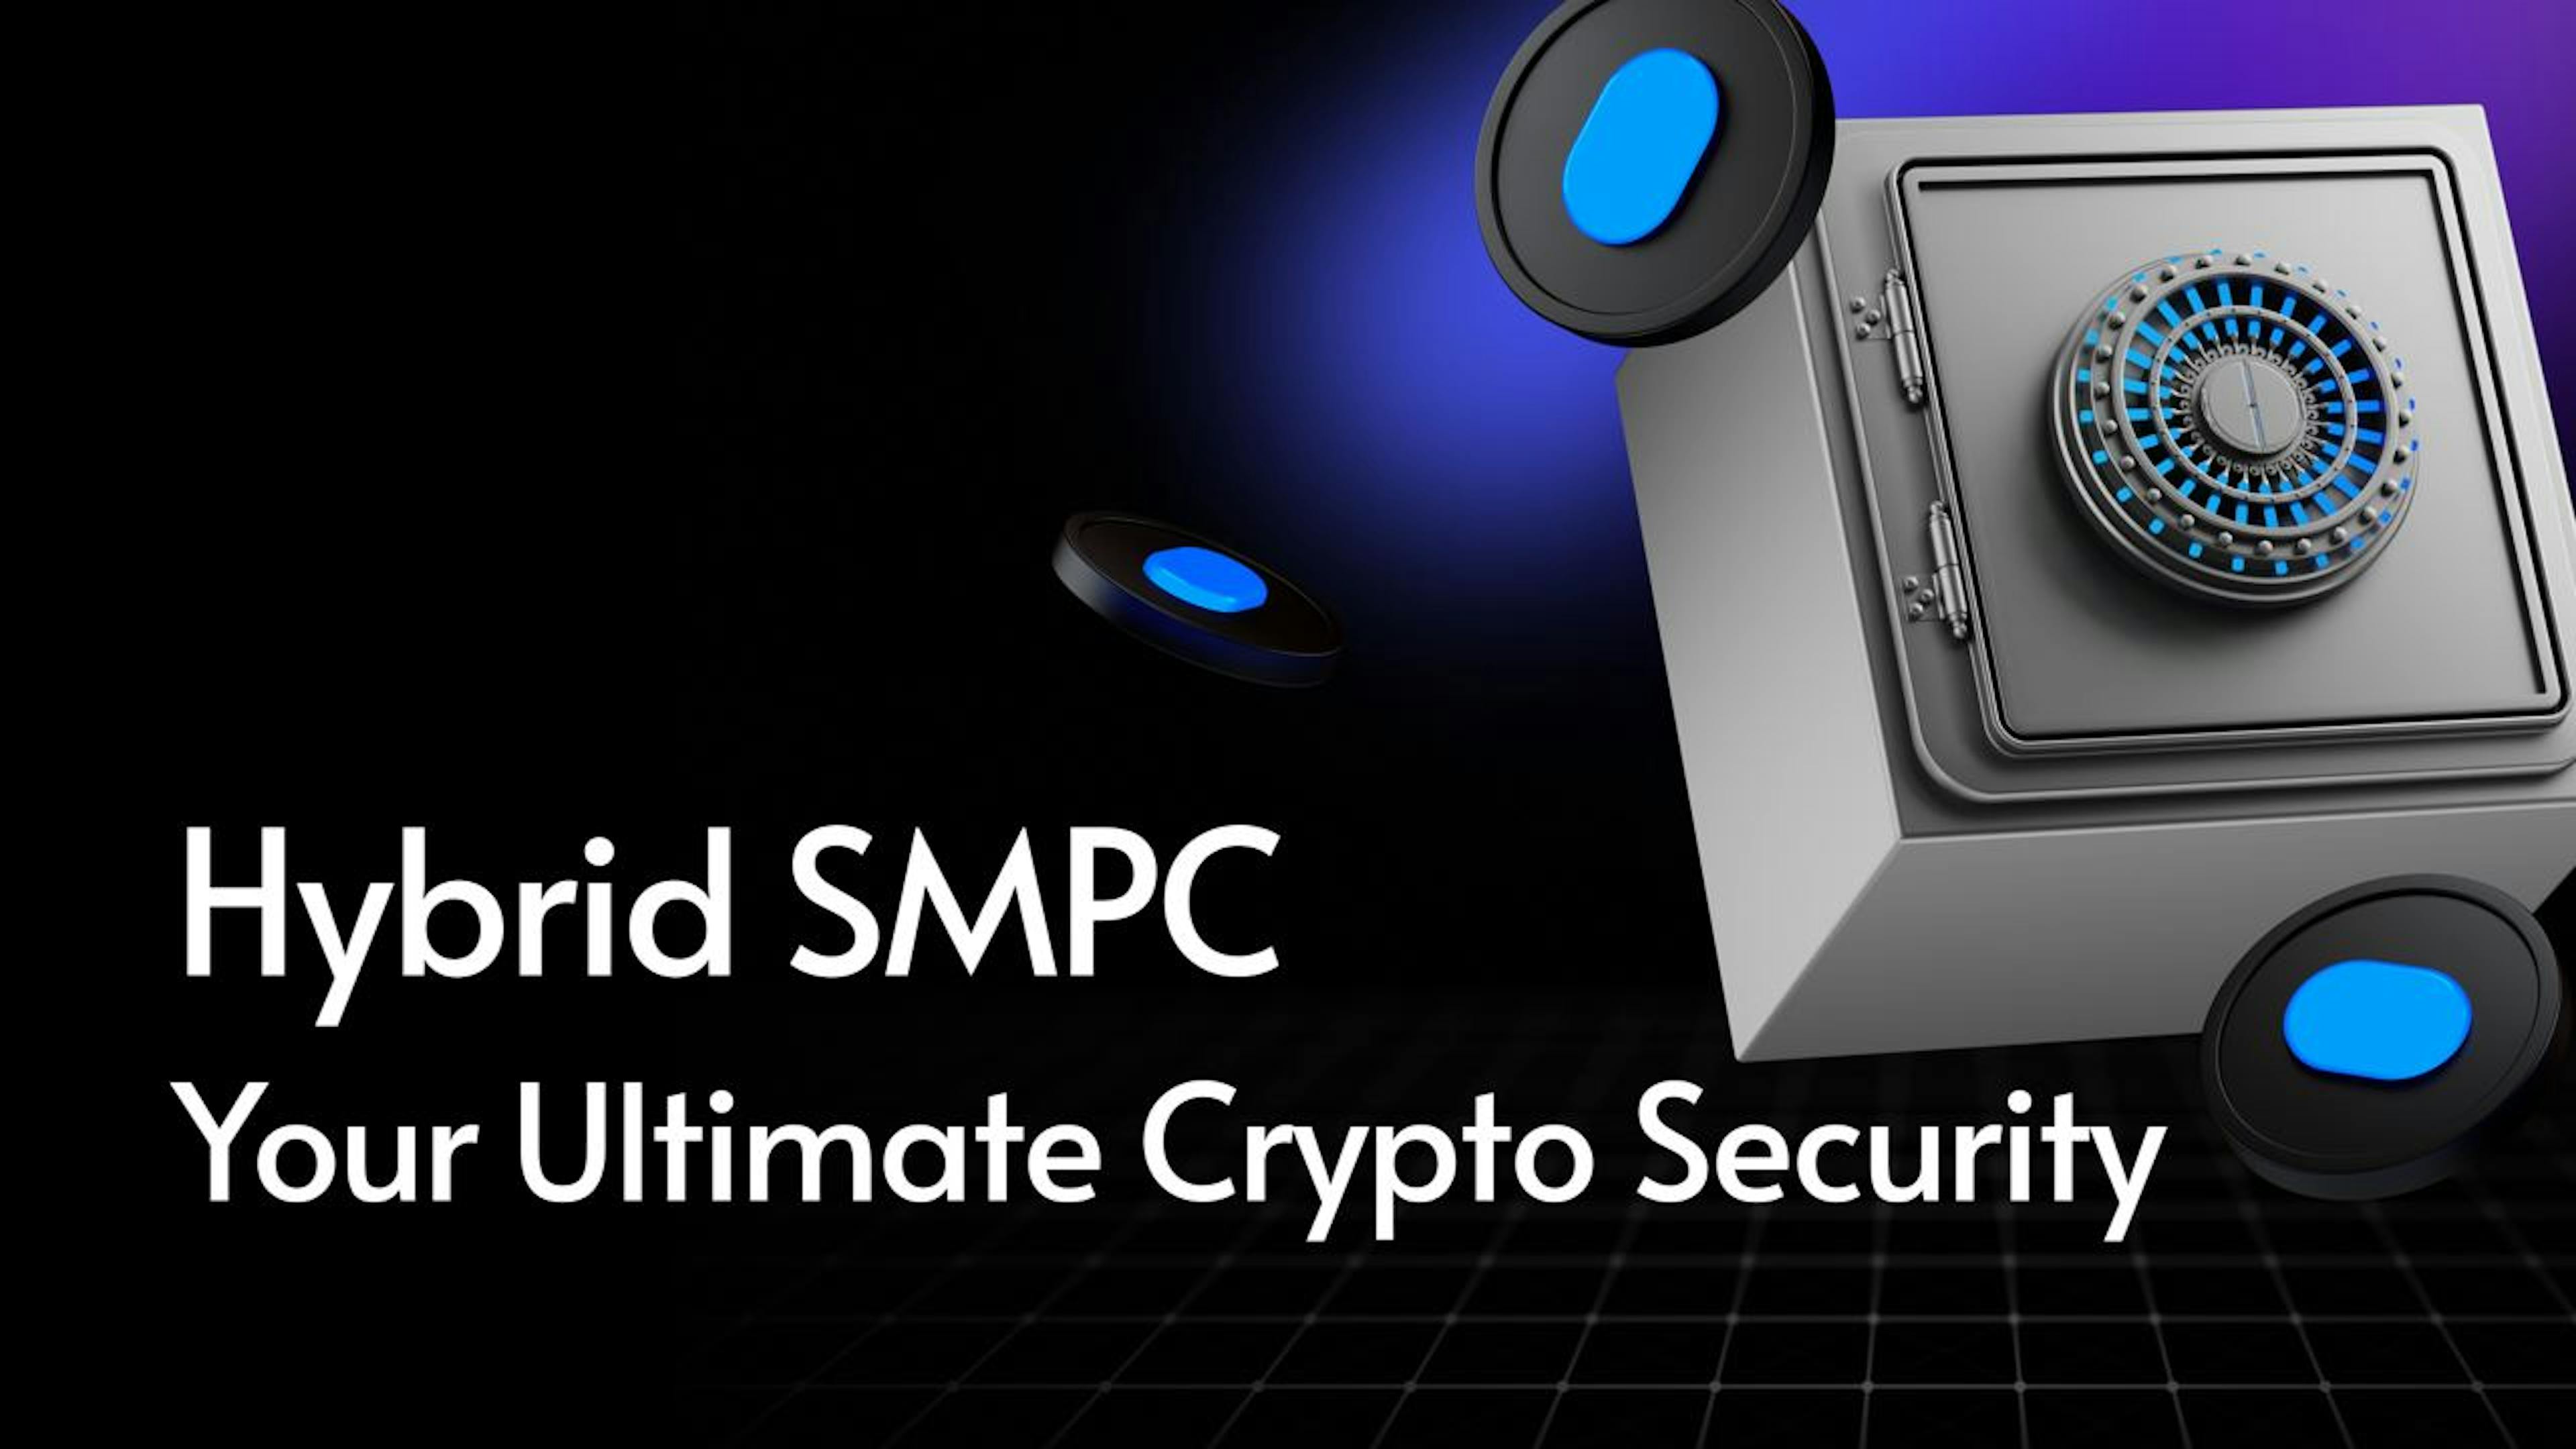 featured image - Hybrid SMPC Technology – the Cutting Edge in Crypto Wallet Security